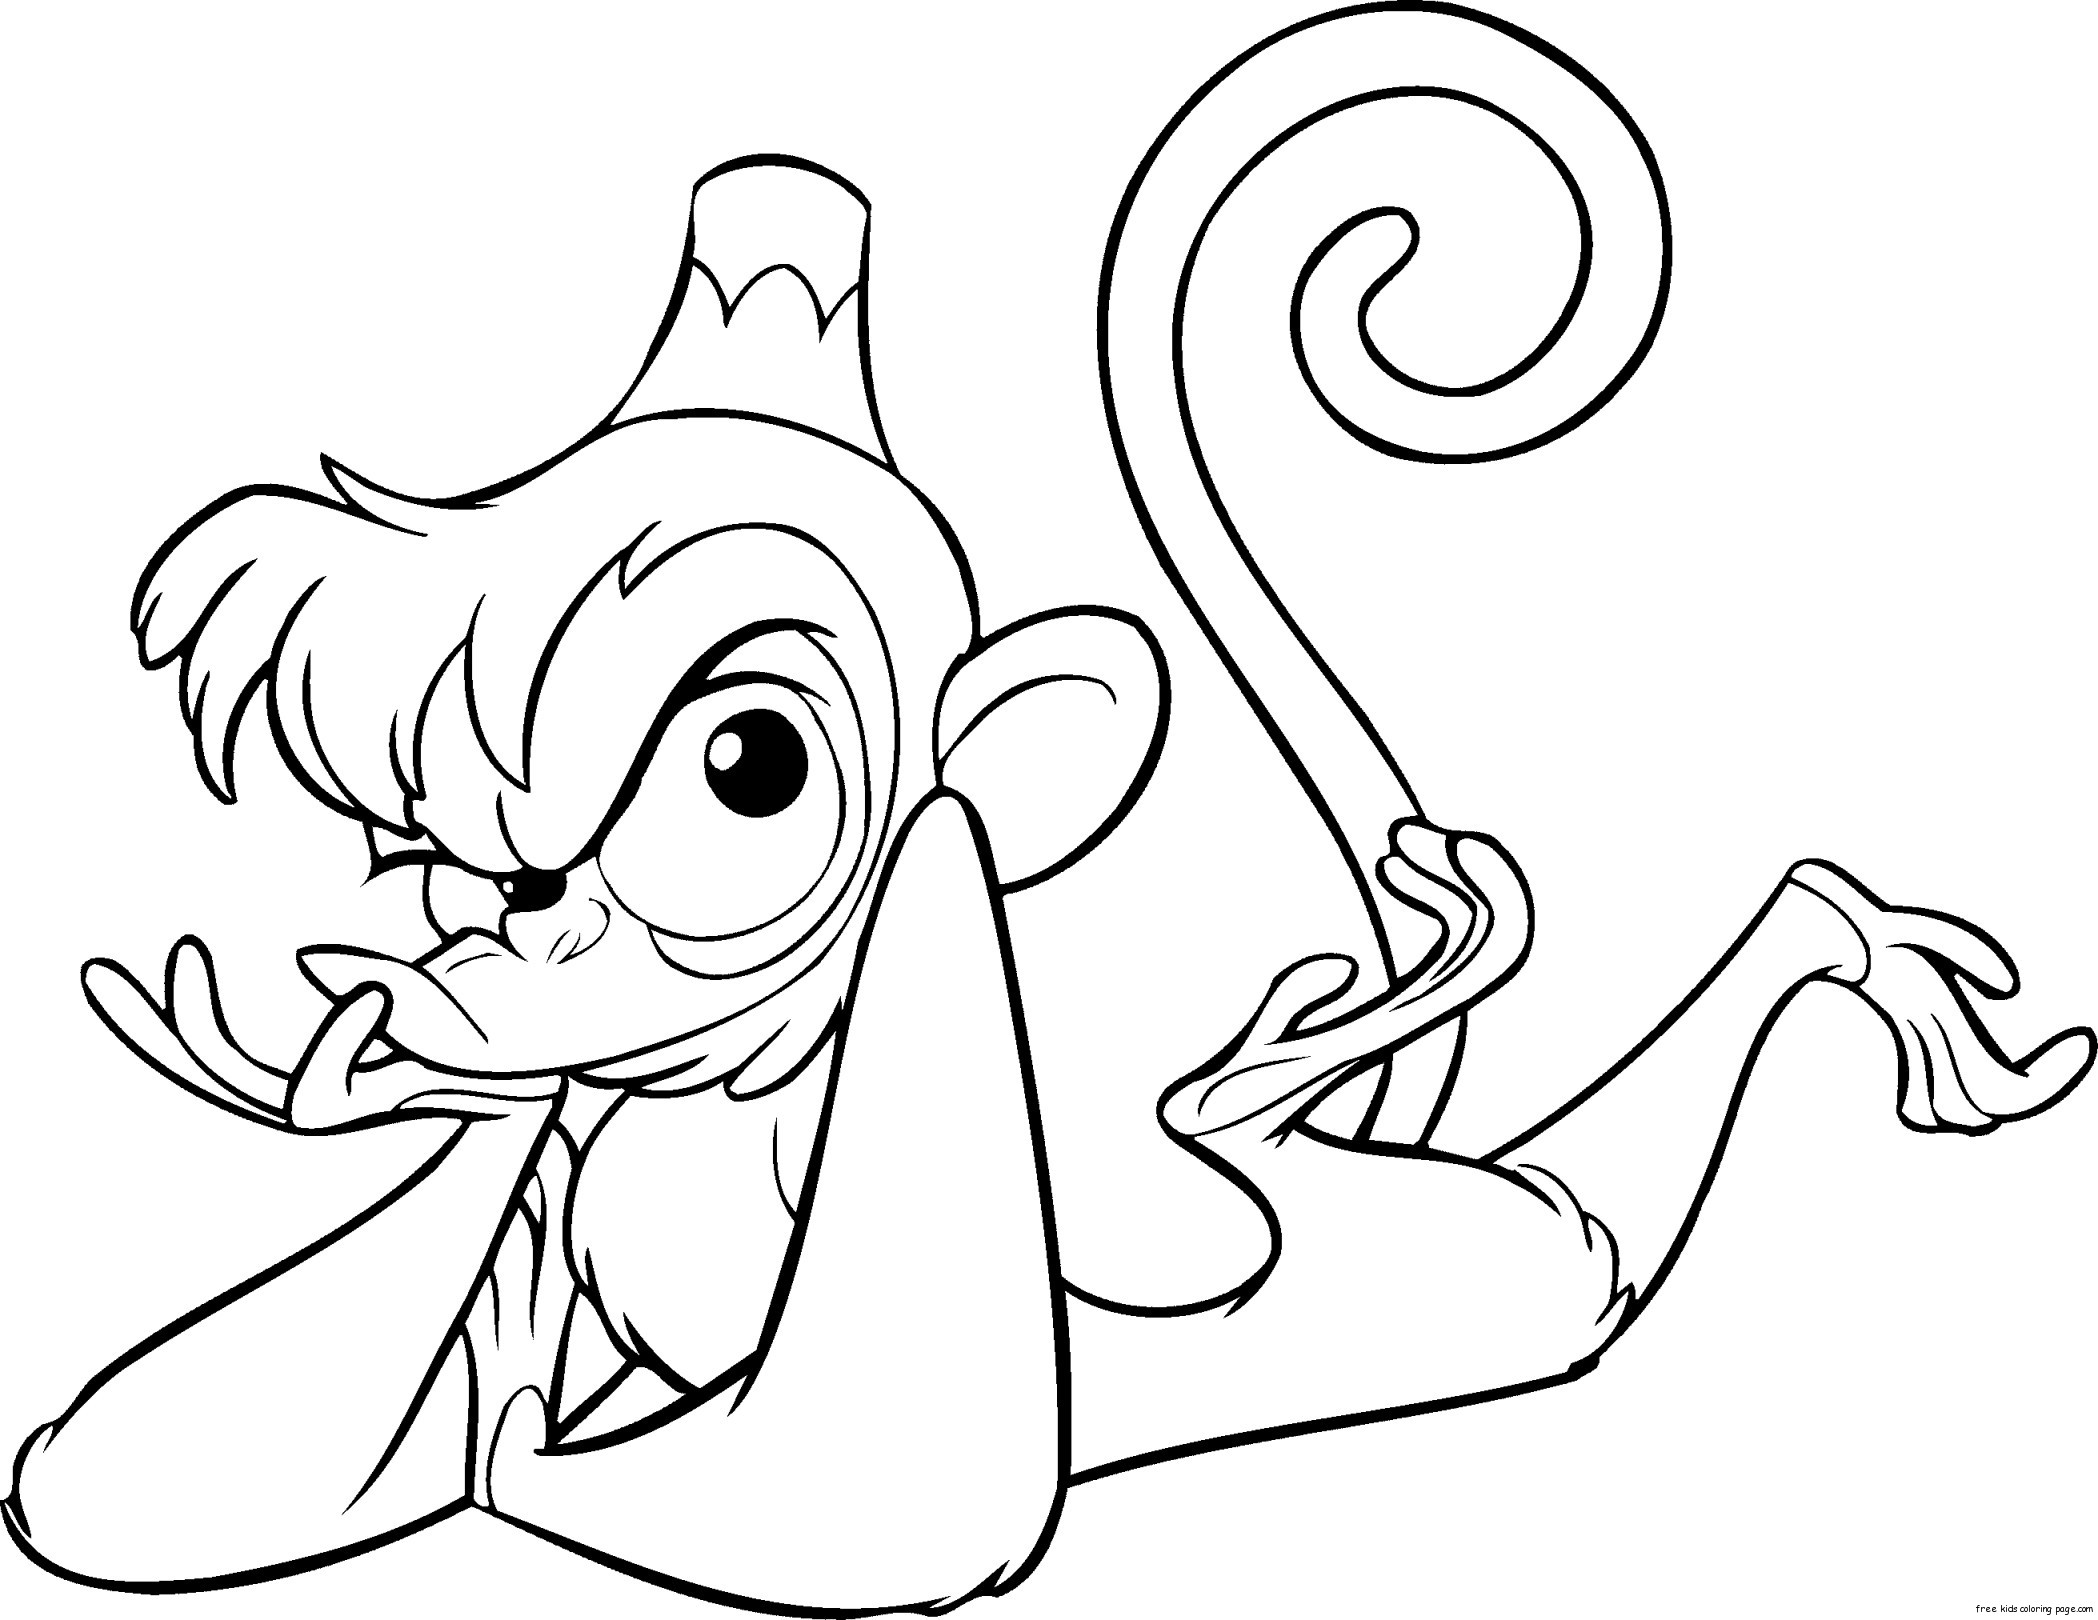 Drawing Aladdin 20 Animation Movies – Printable coloring pages